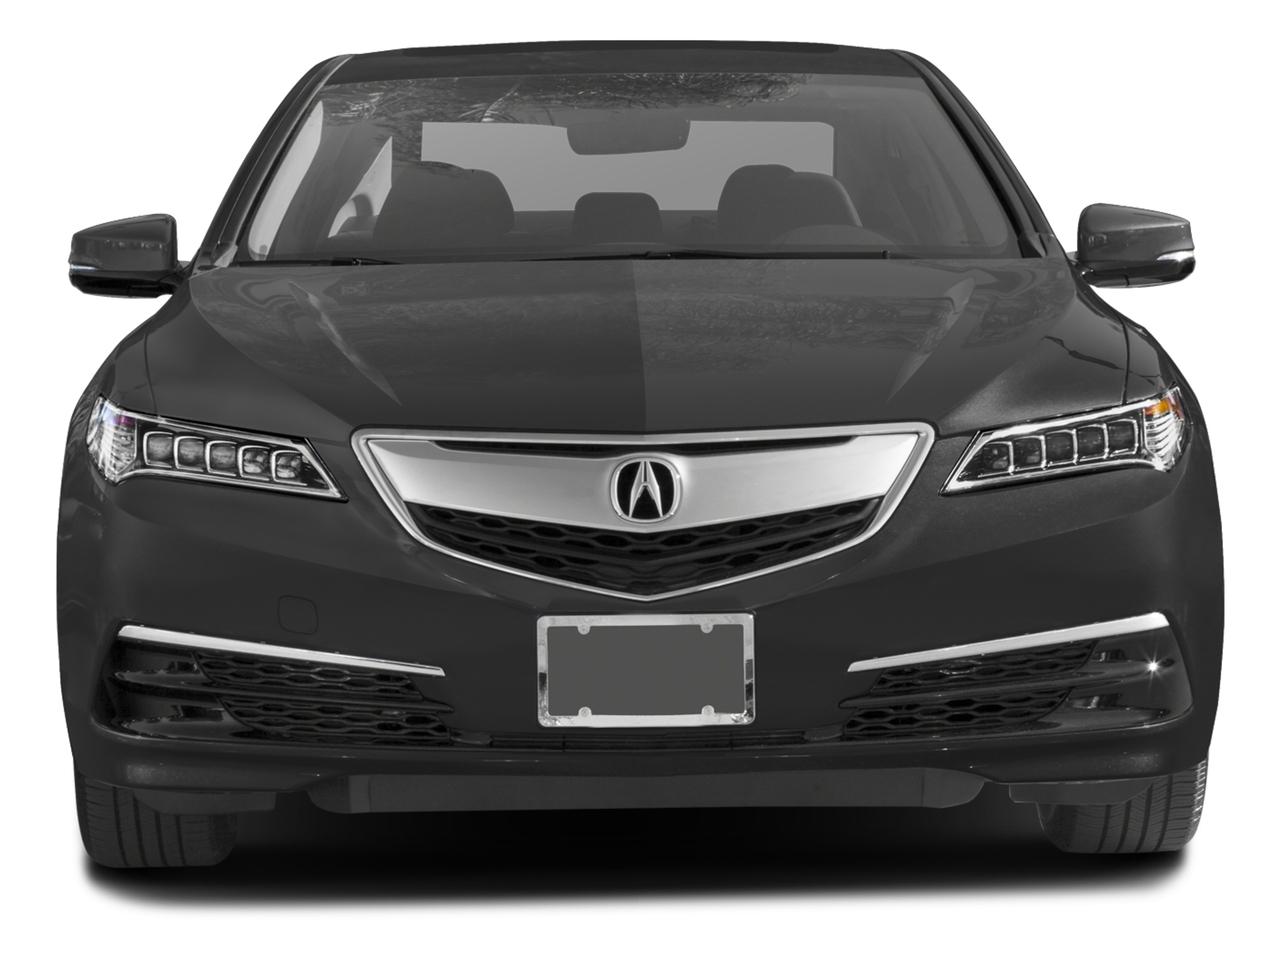 2016 Acura TLX Vehicle Photo in Clearwater, FL 33764